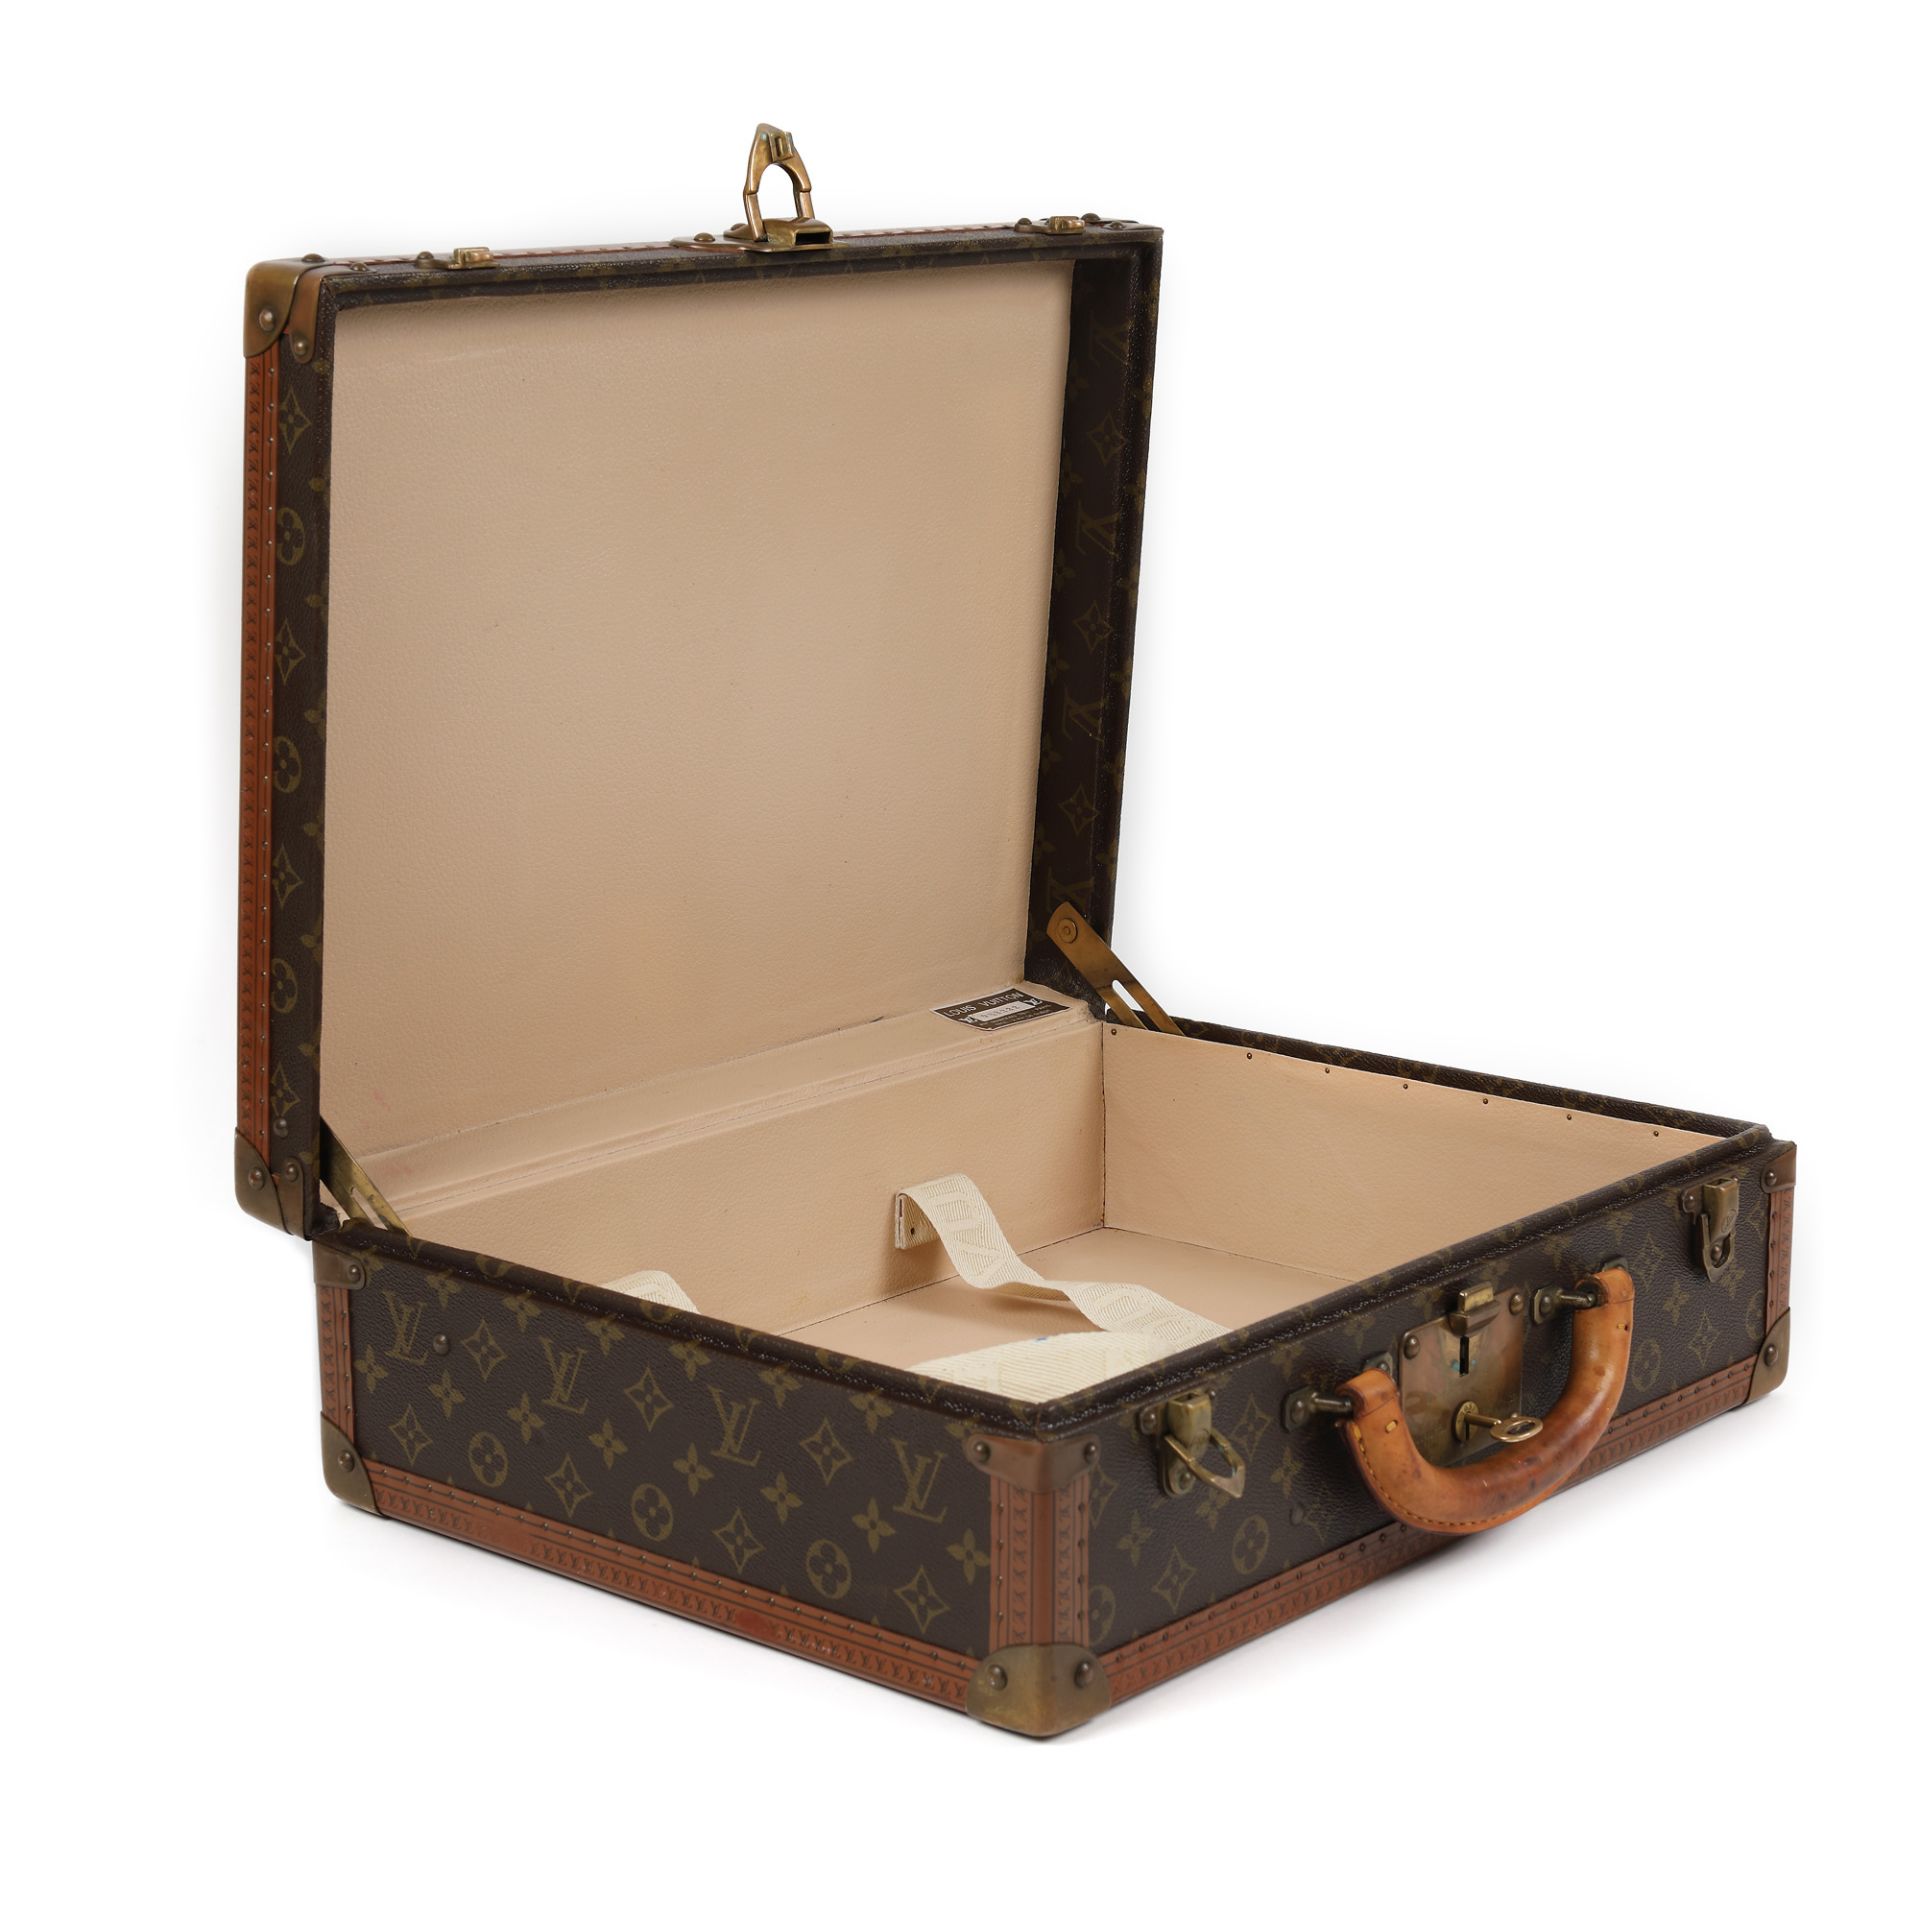 Pair of Louis Vuitton suitcases for travel - Image 4 of 8